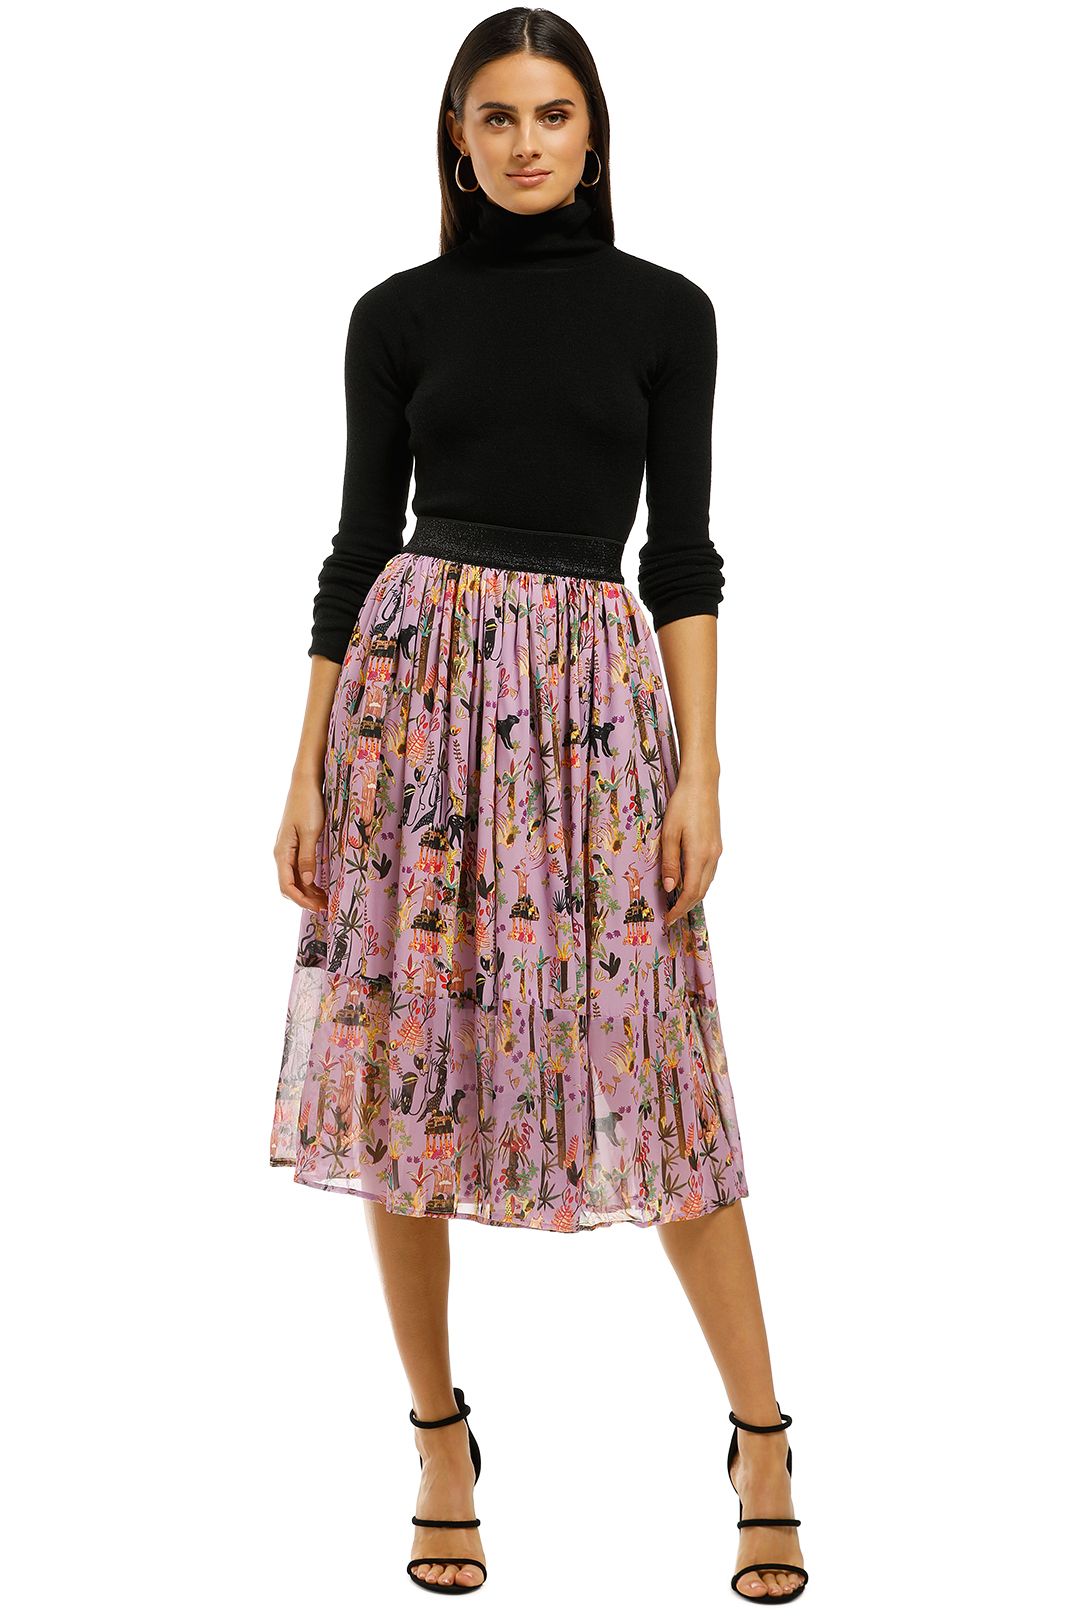 Curate-by-Trelise-Cooper-Skirt-Of-Art-Skirt-Lilac-Front